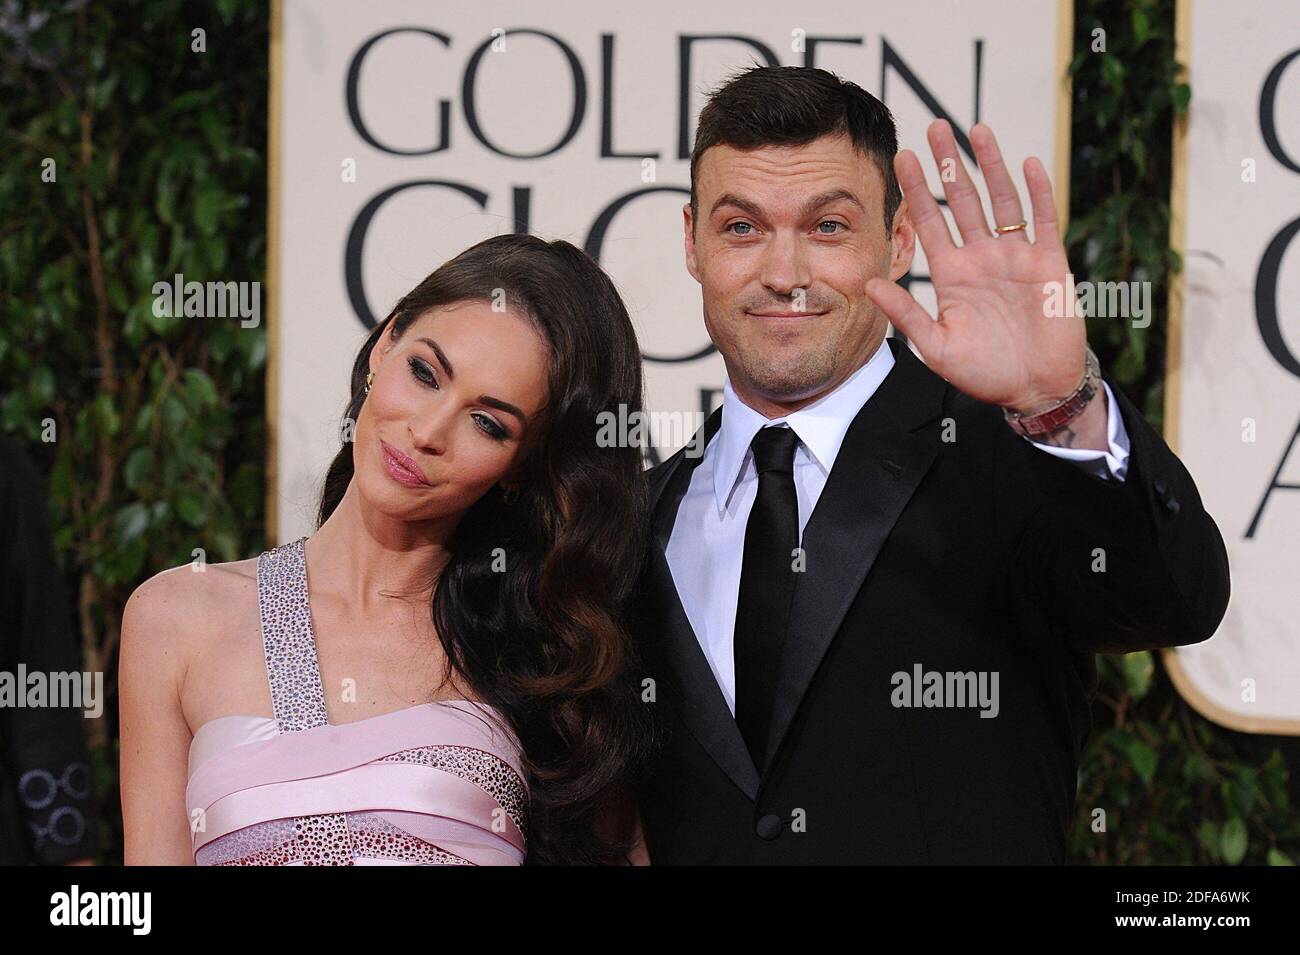 File photo dated January 16, 2011 of Megan Fox and Brian Austin Green arriving for the 68th Annual Golden Globe Awards ceremony, held at the Beverly Hilton Hotel in Los Angeles, CA, USA. After nearly 10 years of marriage and three children together, Megan Fox and Brian Austin Green have split. The "Beverly Hills, 90210" star confirmed the news on his podcast “…With Brian Austin Green," in an episode titled “Context.” Photo by Lionel Hahn/ABACAUSA.COM Stock Photo